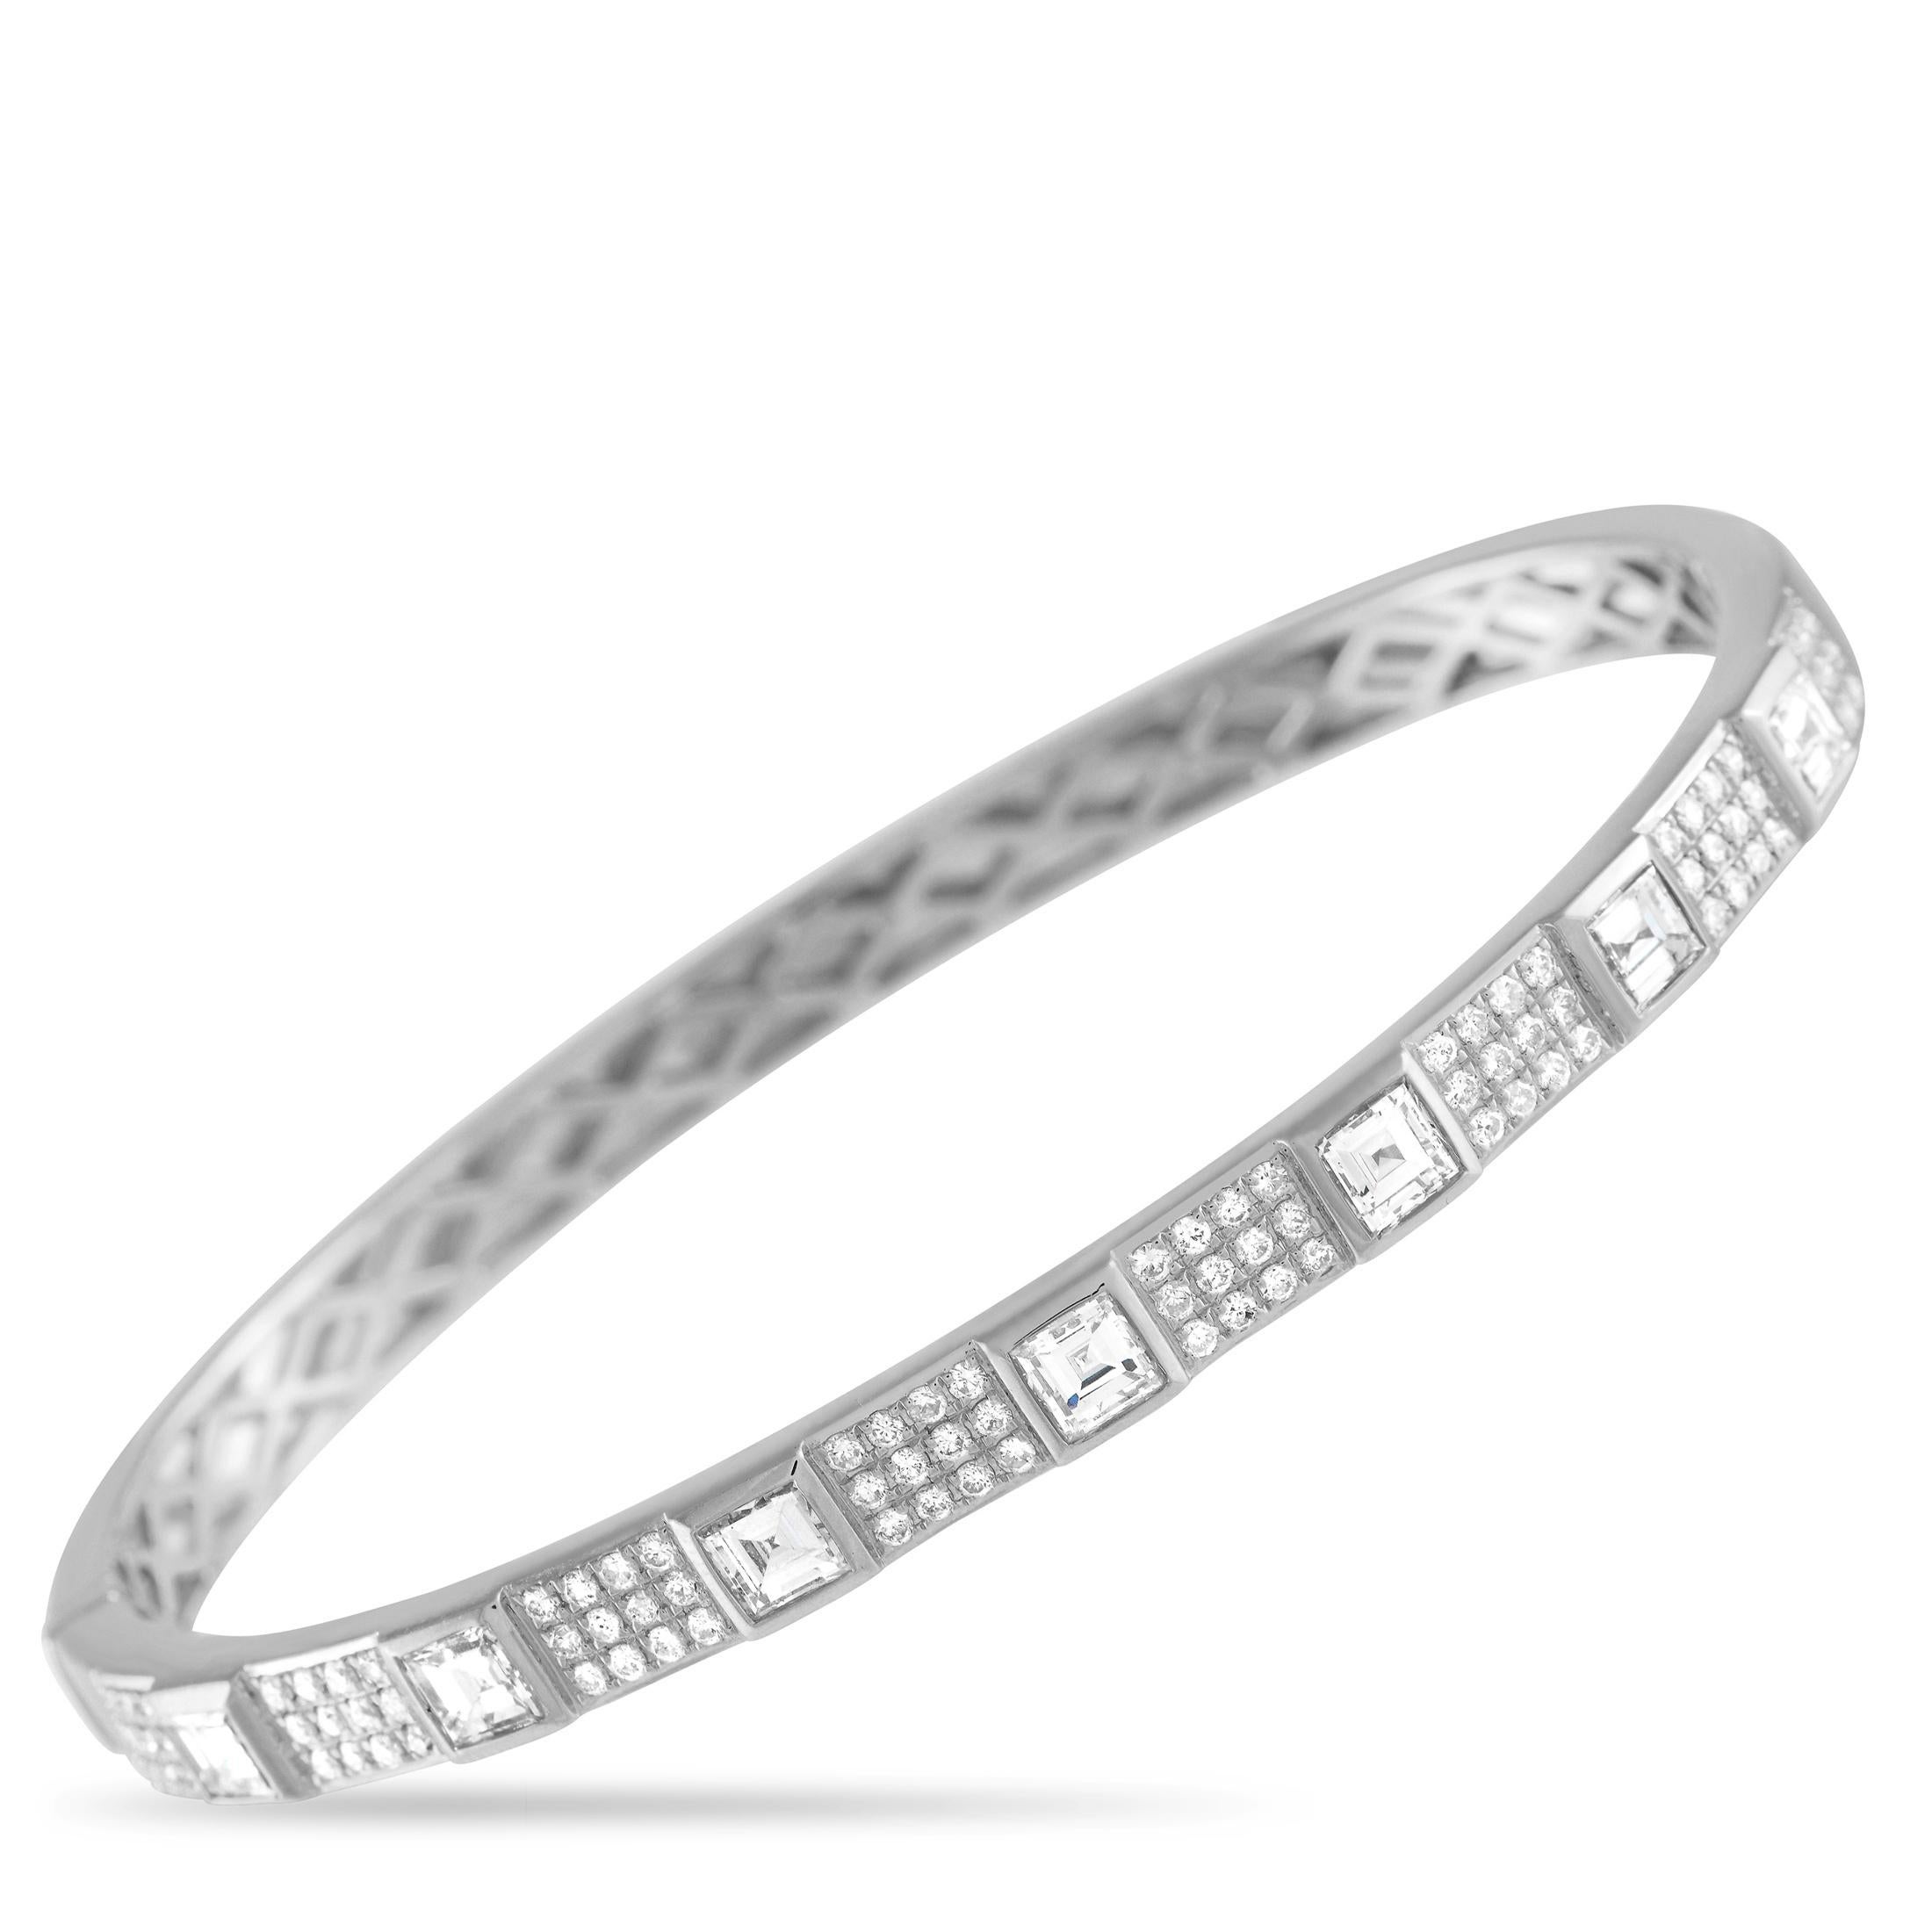 LB Exclusive 18K White Gold 2.65ct Diamond Bracelet In New Condition For Sale In Southampton, PA